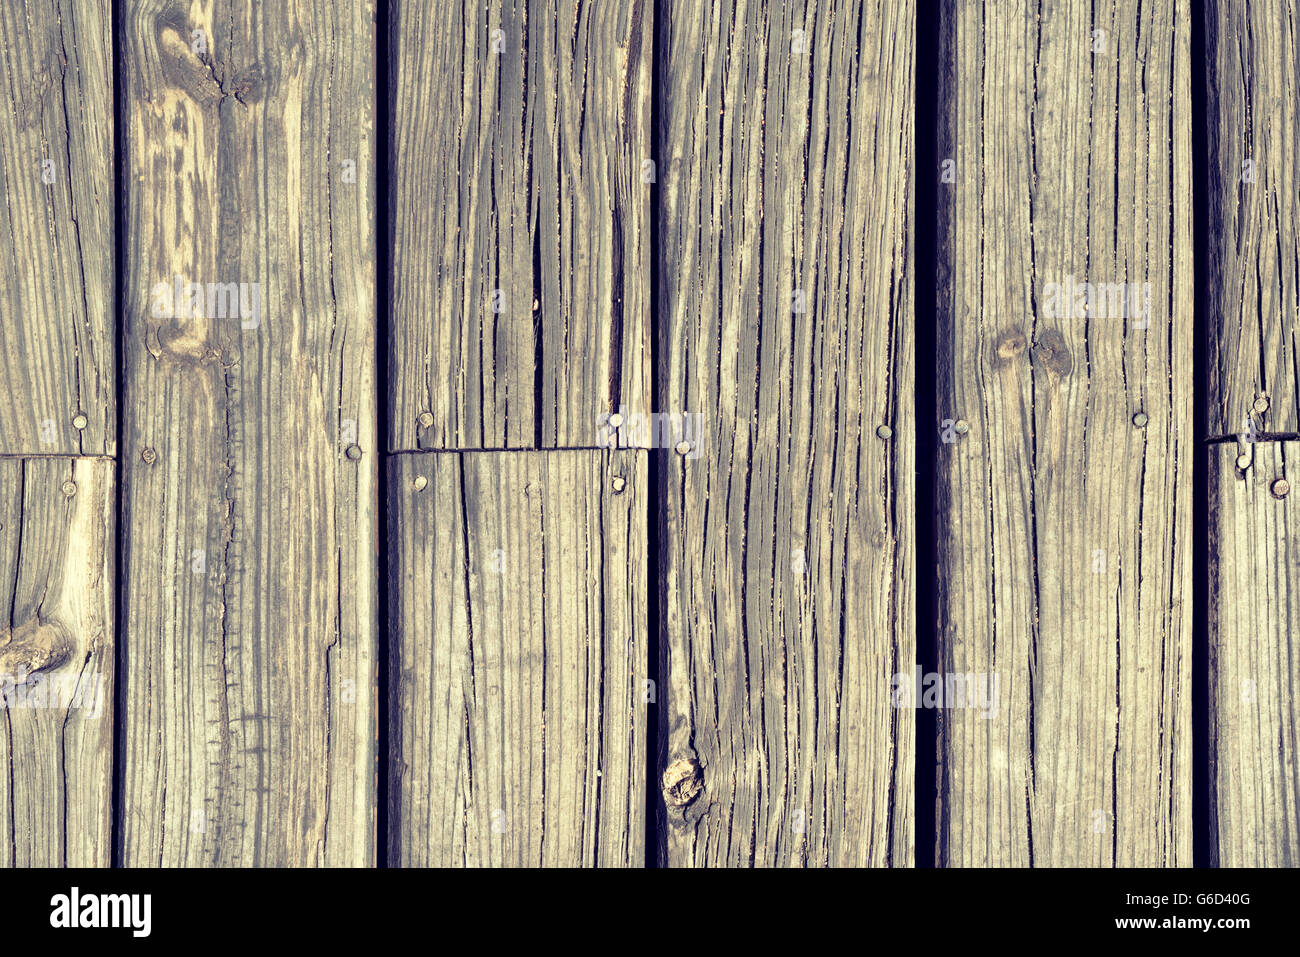 Old wood board floor background texture, top view of rustic vintage style wooden planks. Stock Photo